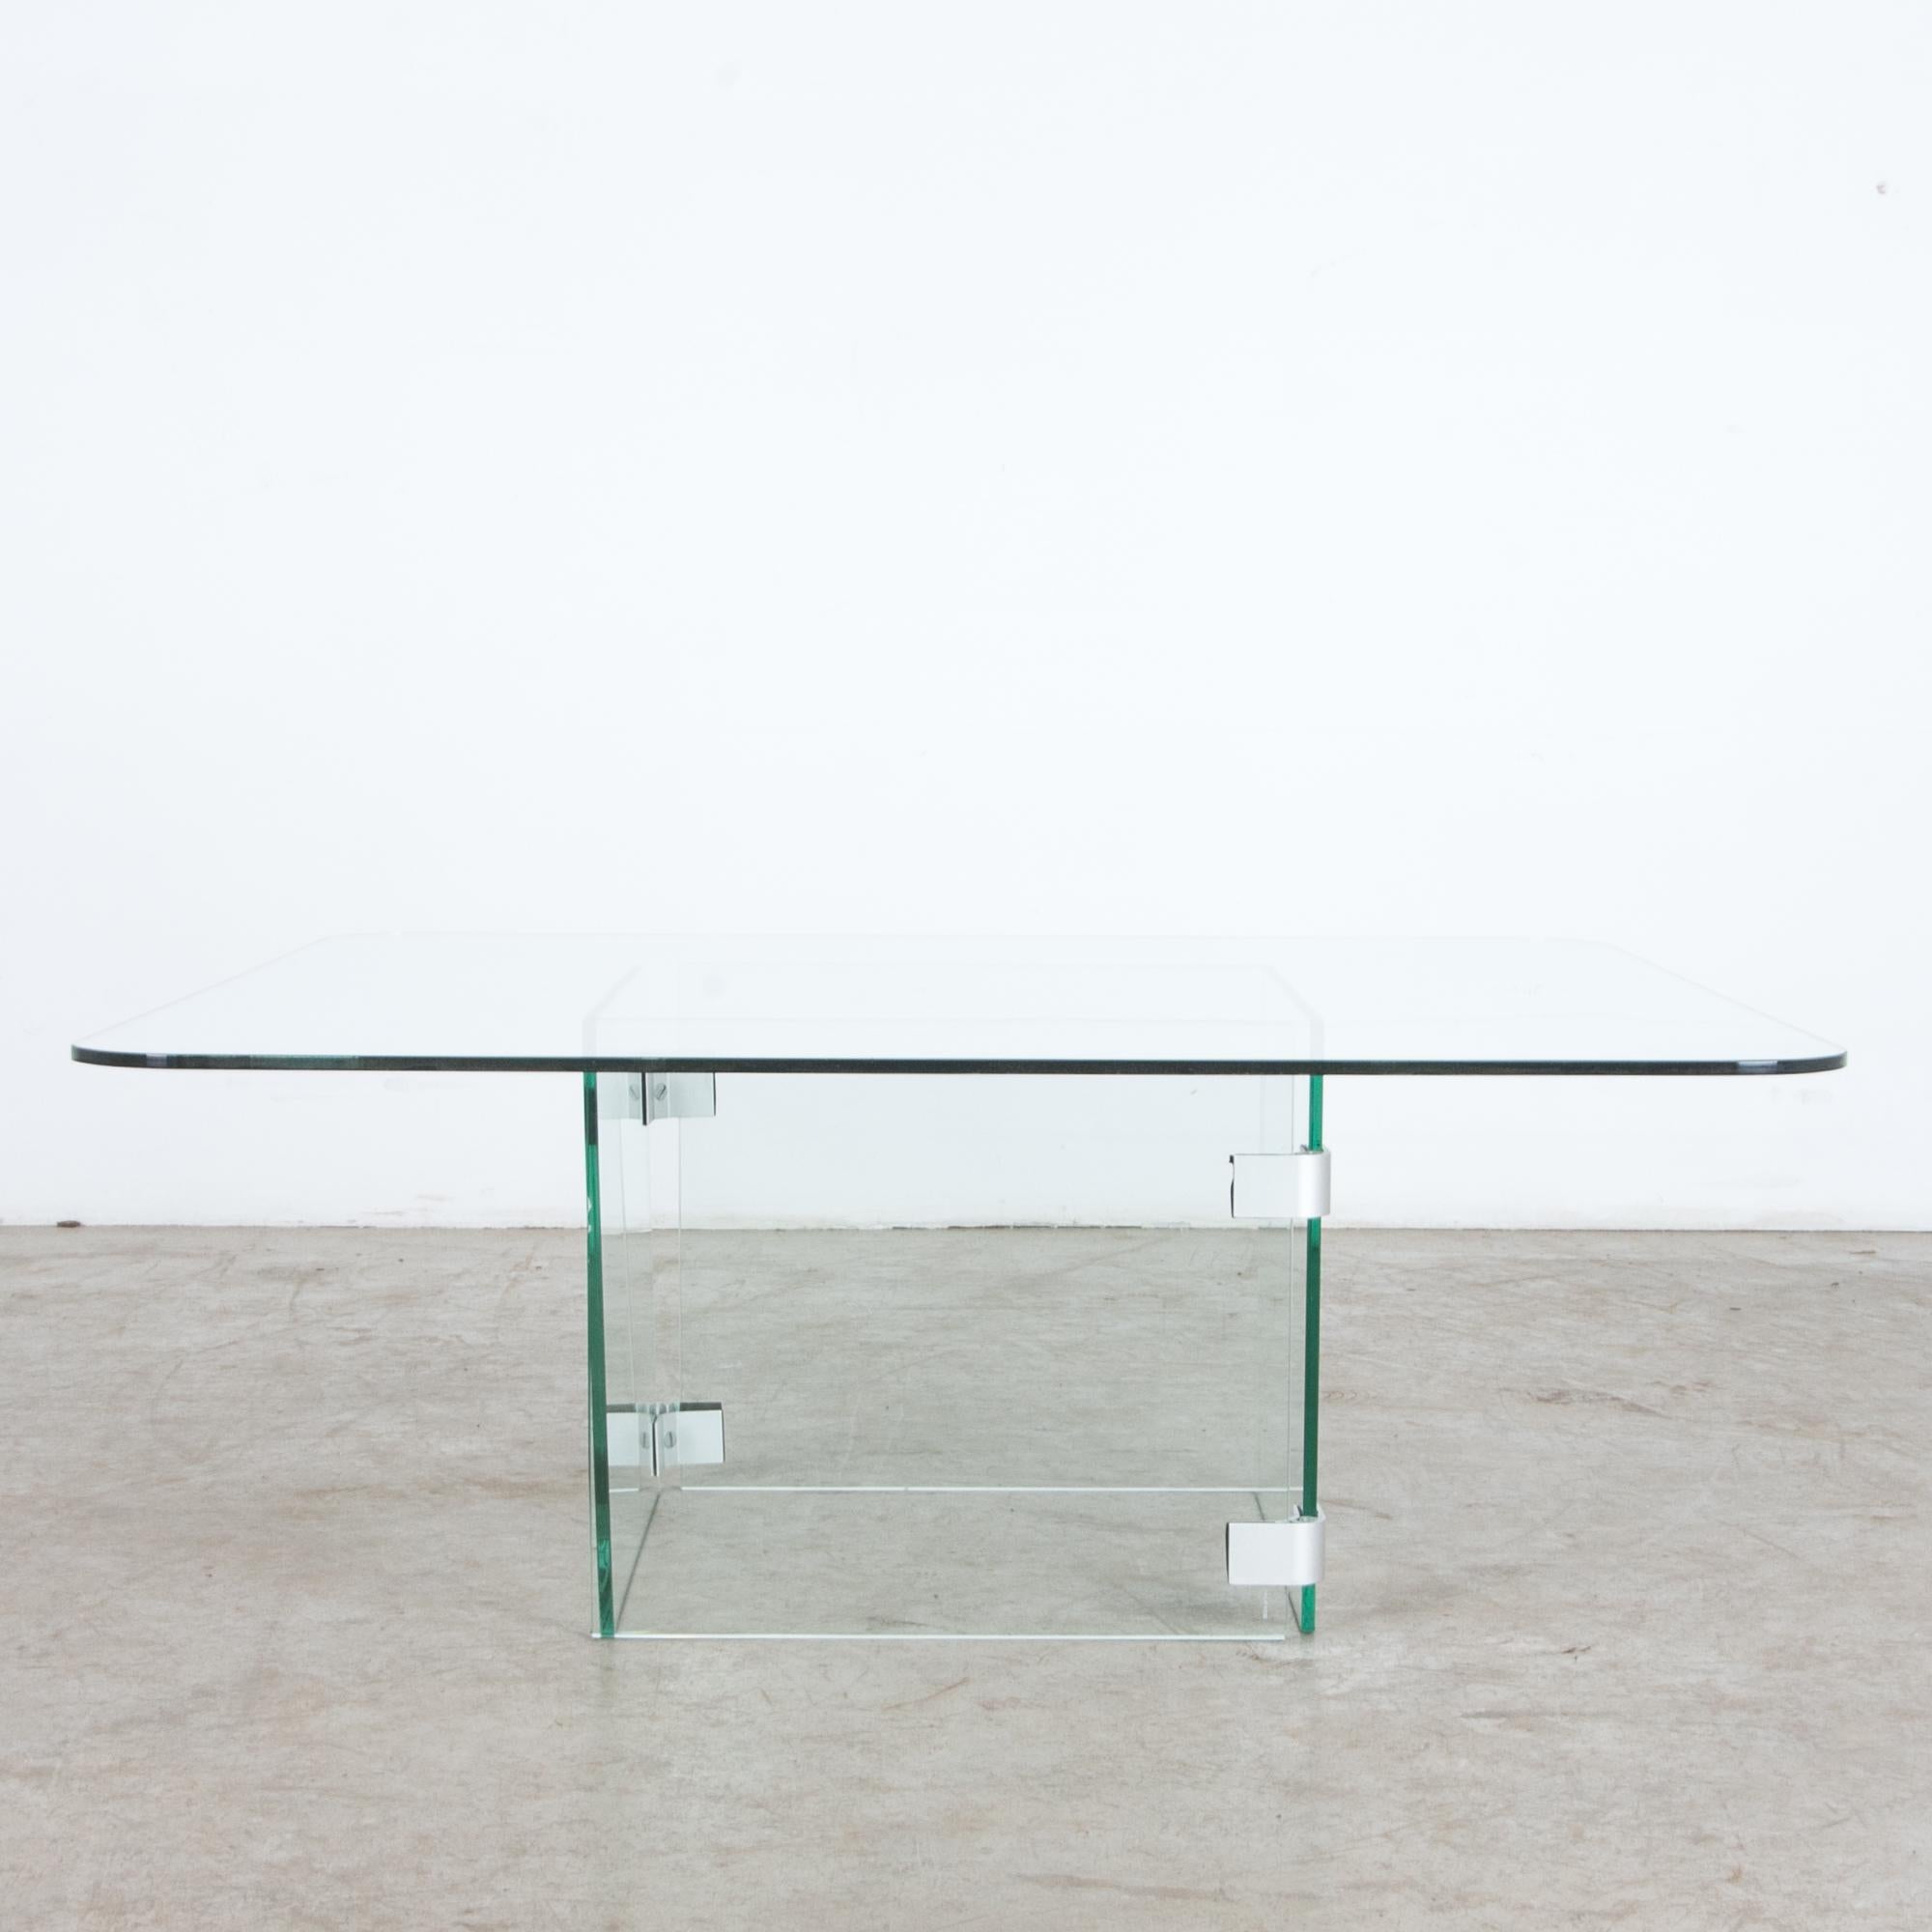 A minimal approach typifies this 1960s coffee table, a sleek and stylish element from Midcentury Italy. Fresh and simple, this mid-20th century piece captures the classic materials of Modernism, metal and glass, in a refined and elegant package.